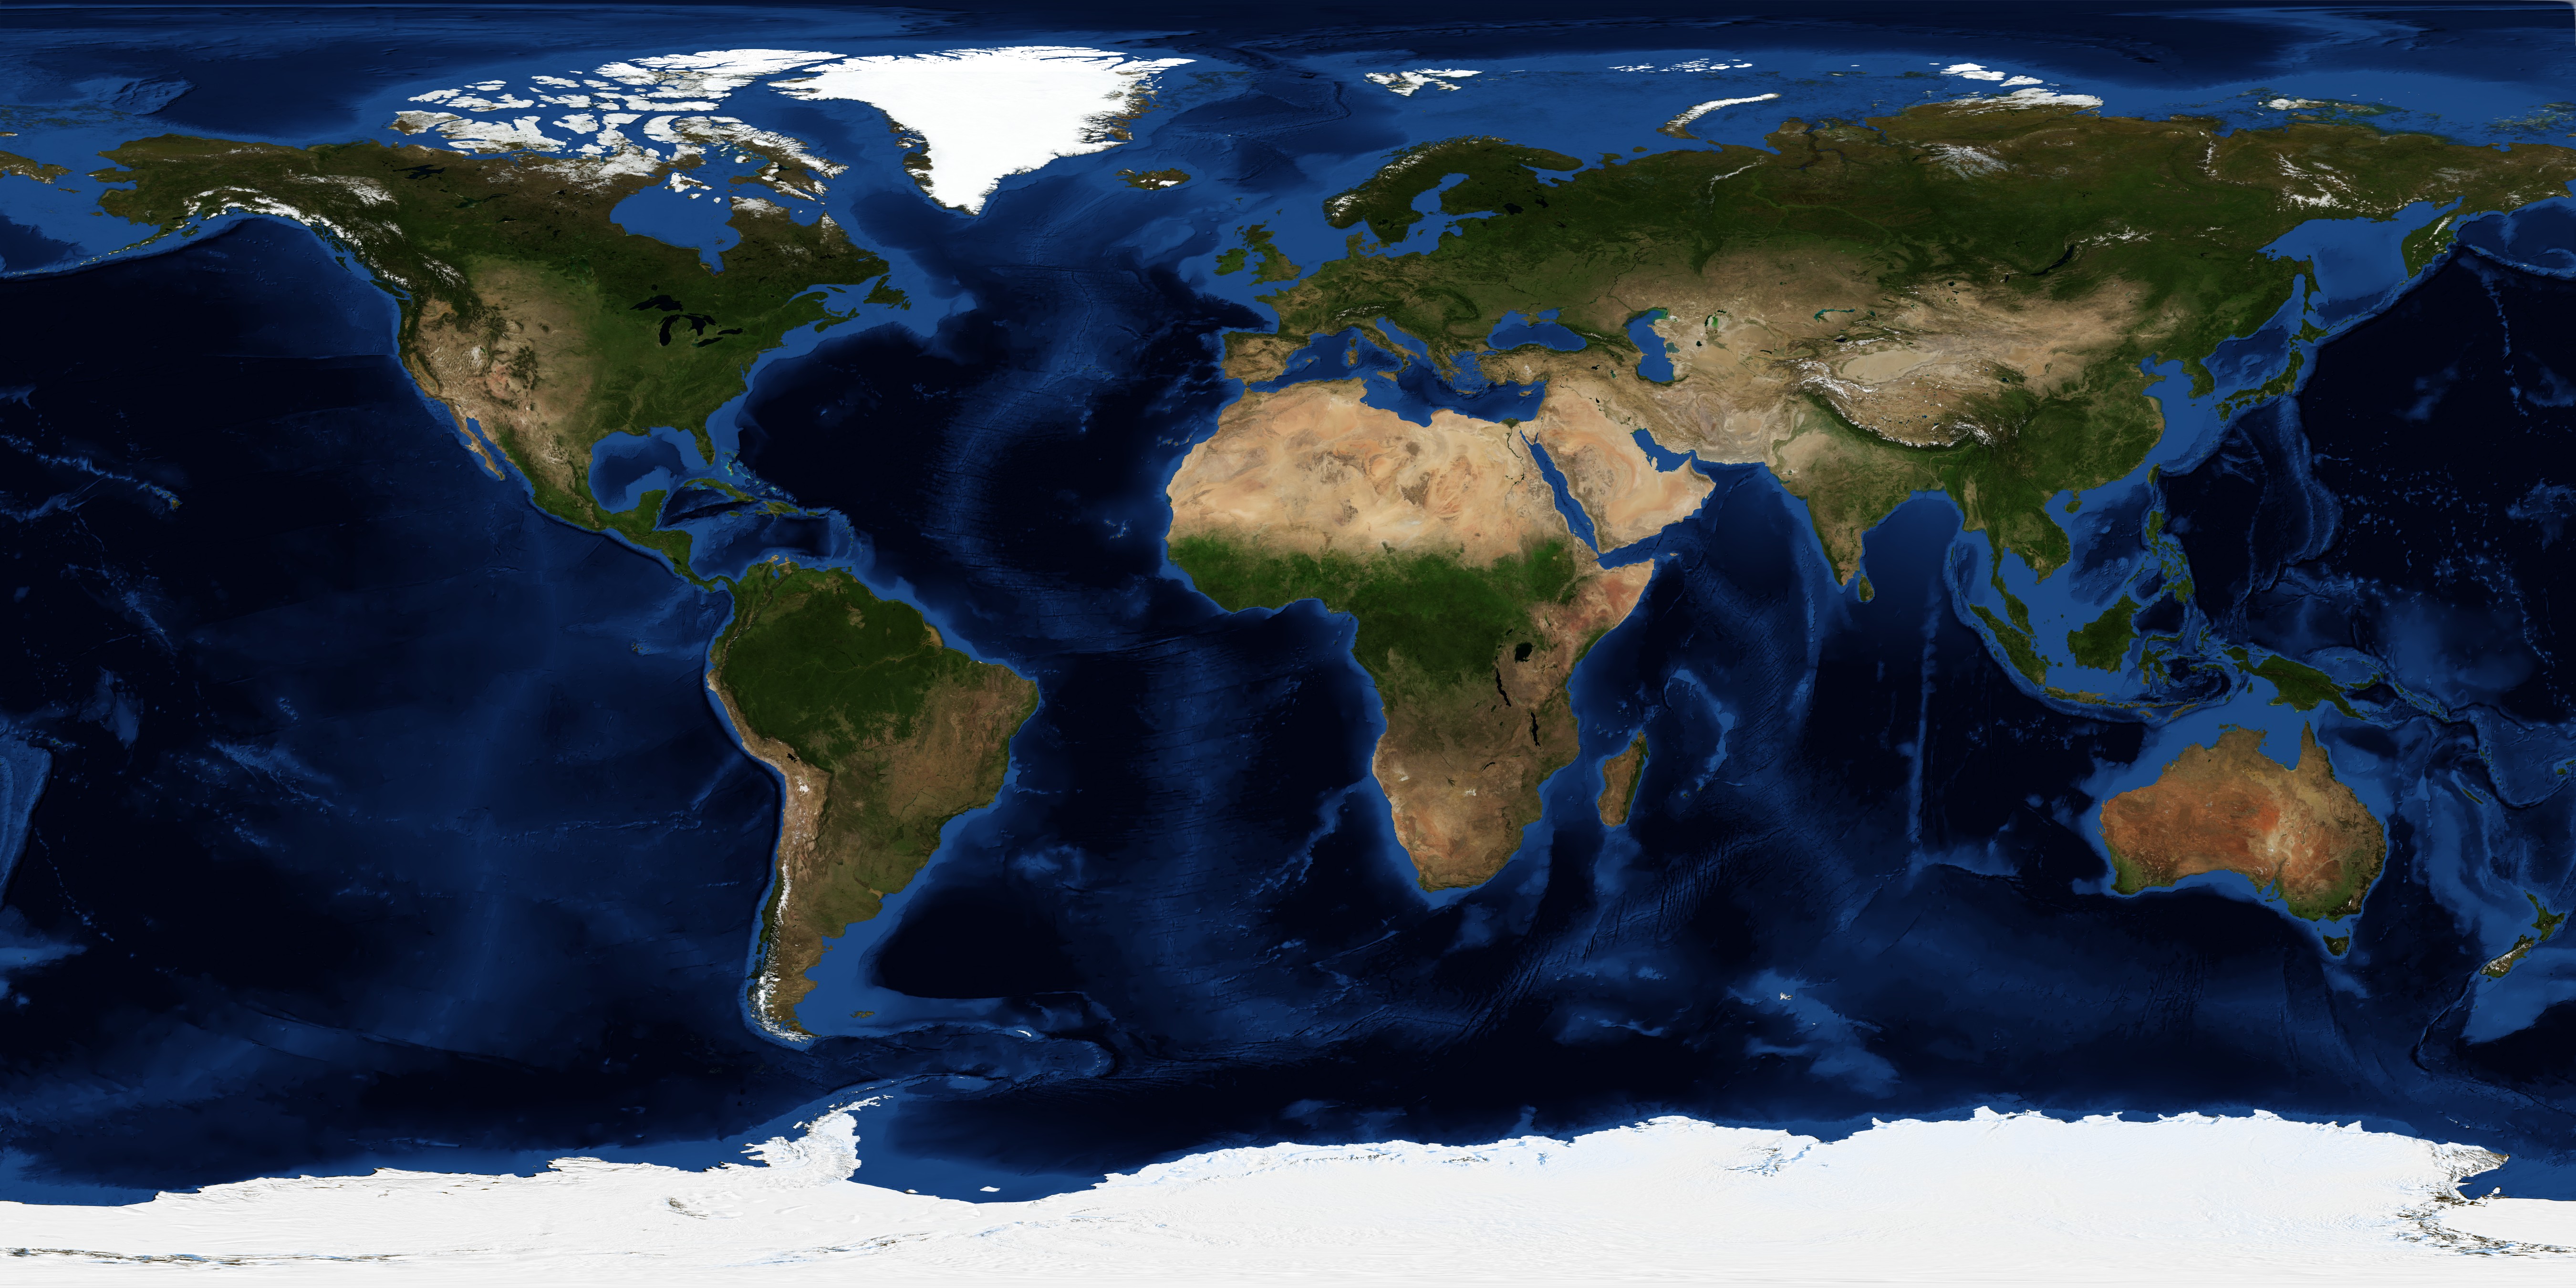 August, Blue Marble Next Generation w/ Topography and Bathymetry - related image preview